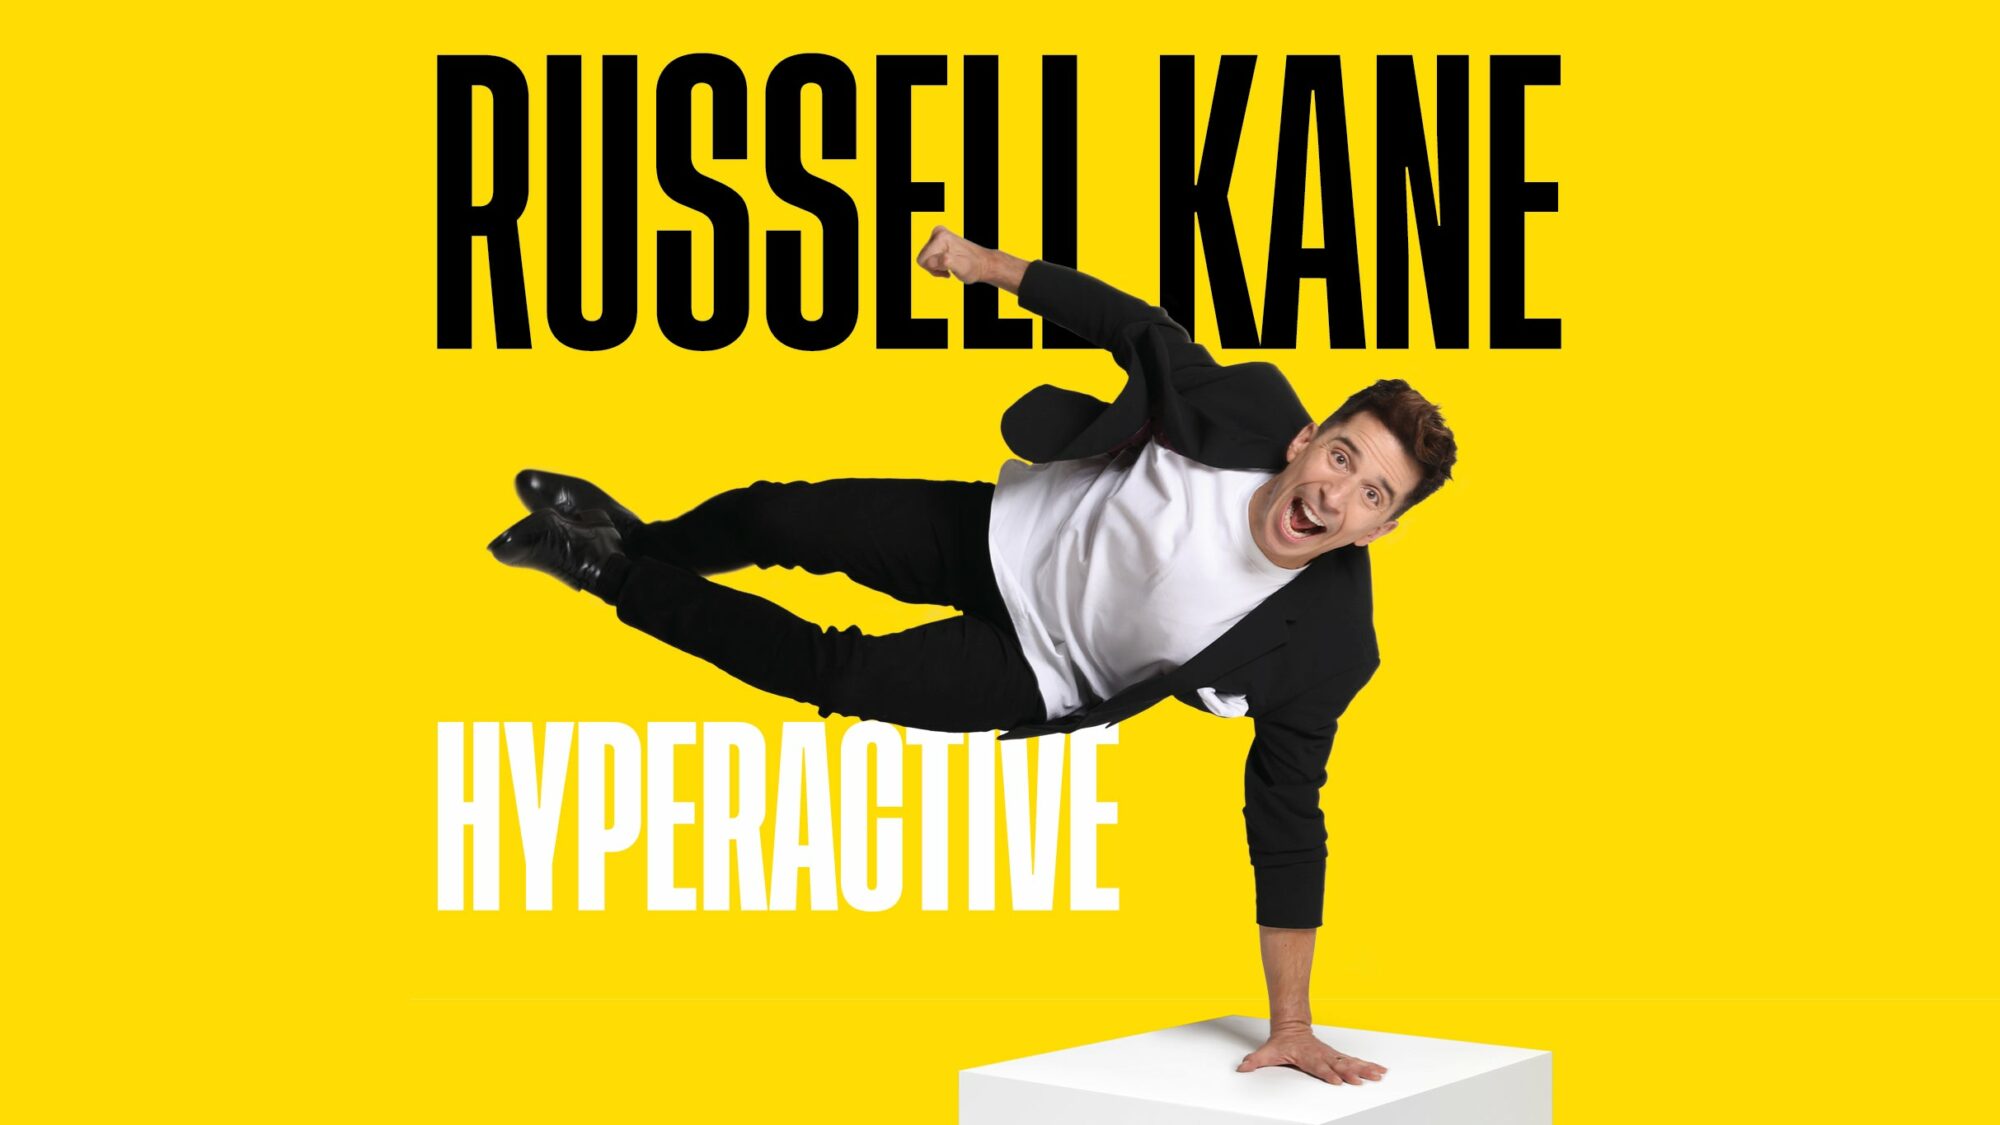 Russell Kane: HyperActive at Middlesbrough Town Hall, Middlesbrough